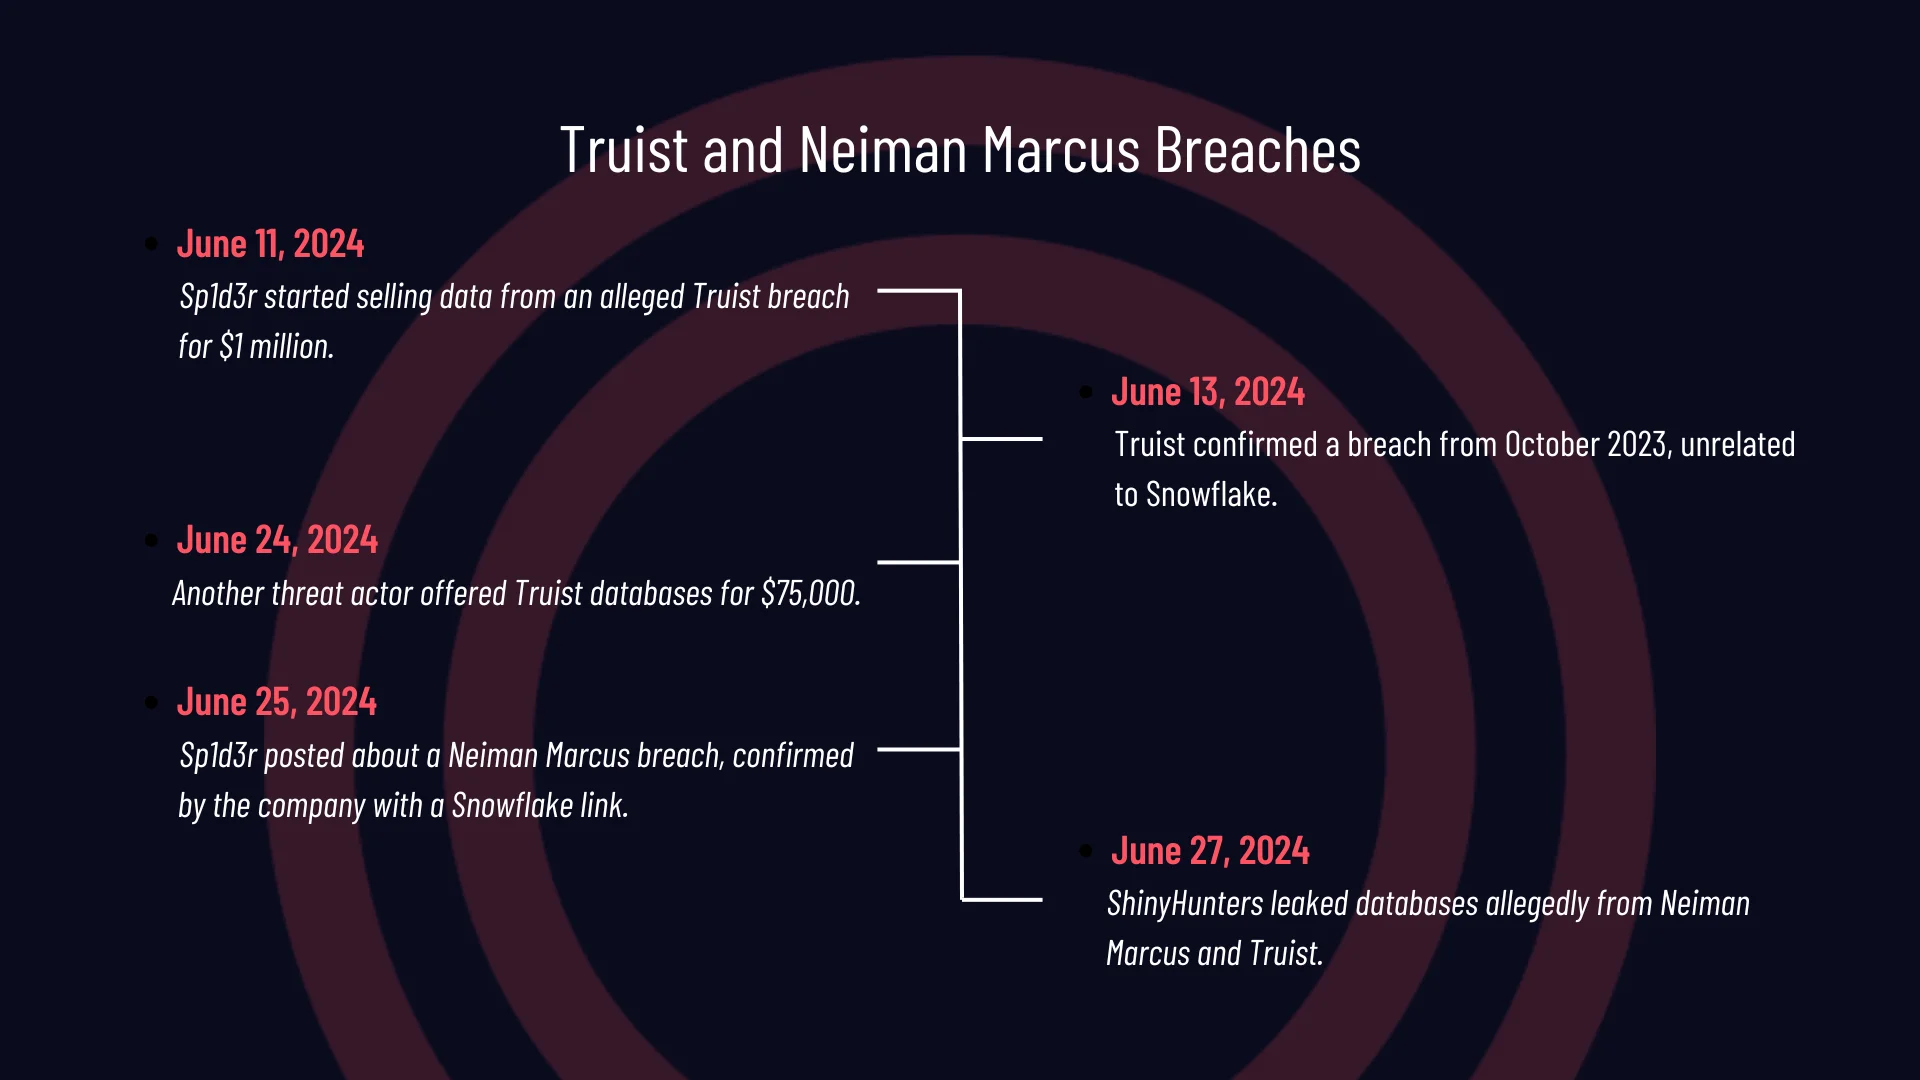 Details of the Truist and Neiman Marcus Breaches